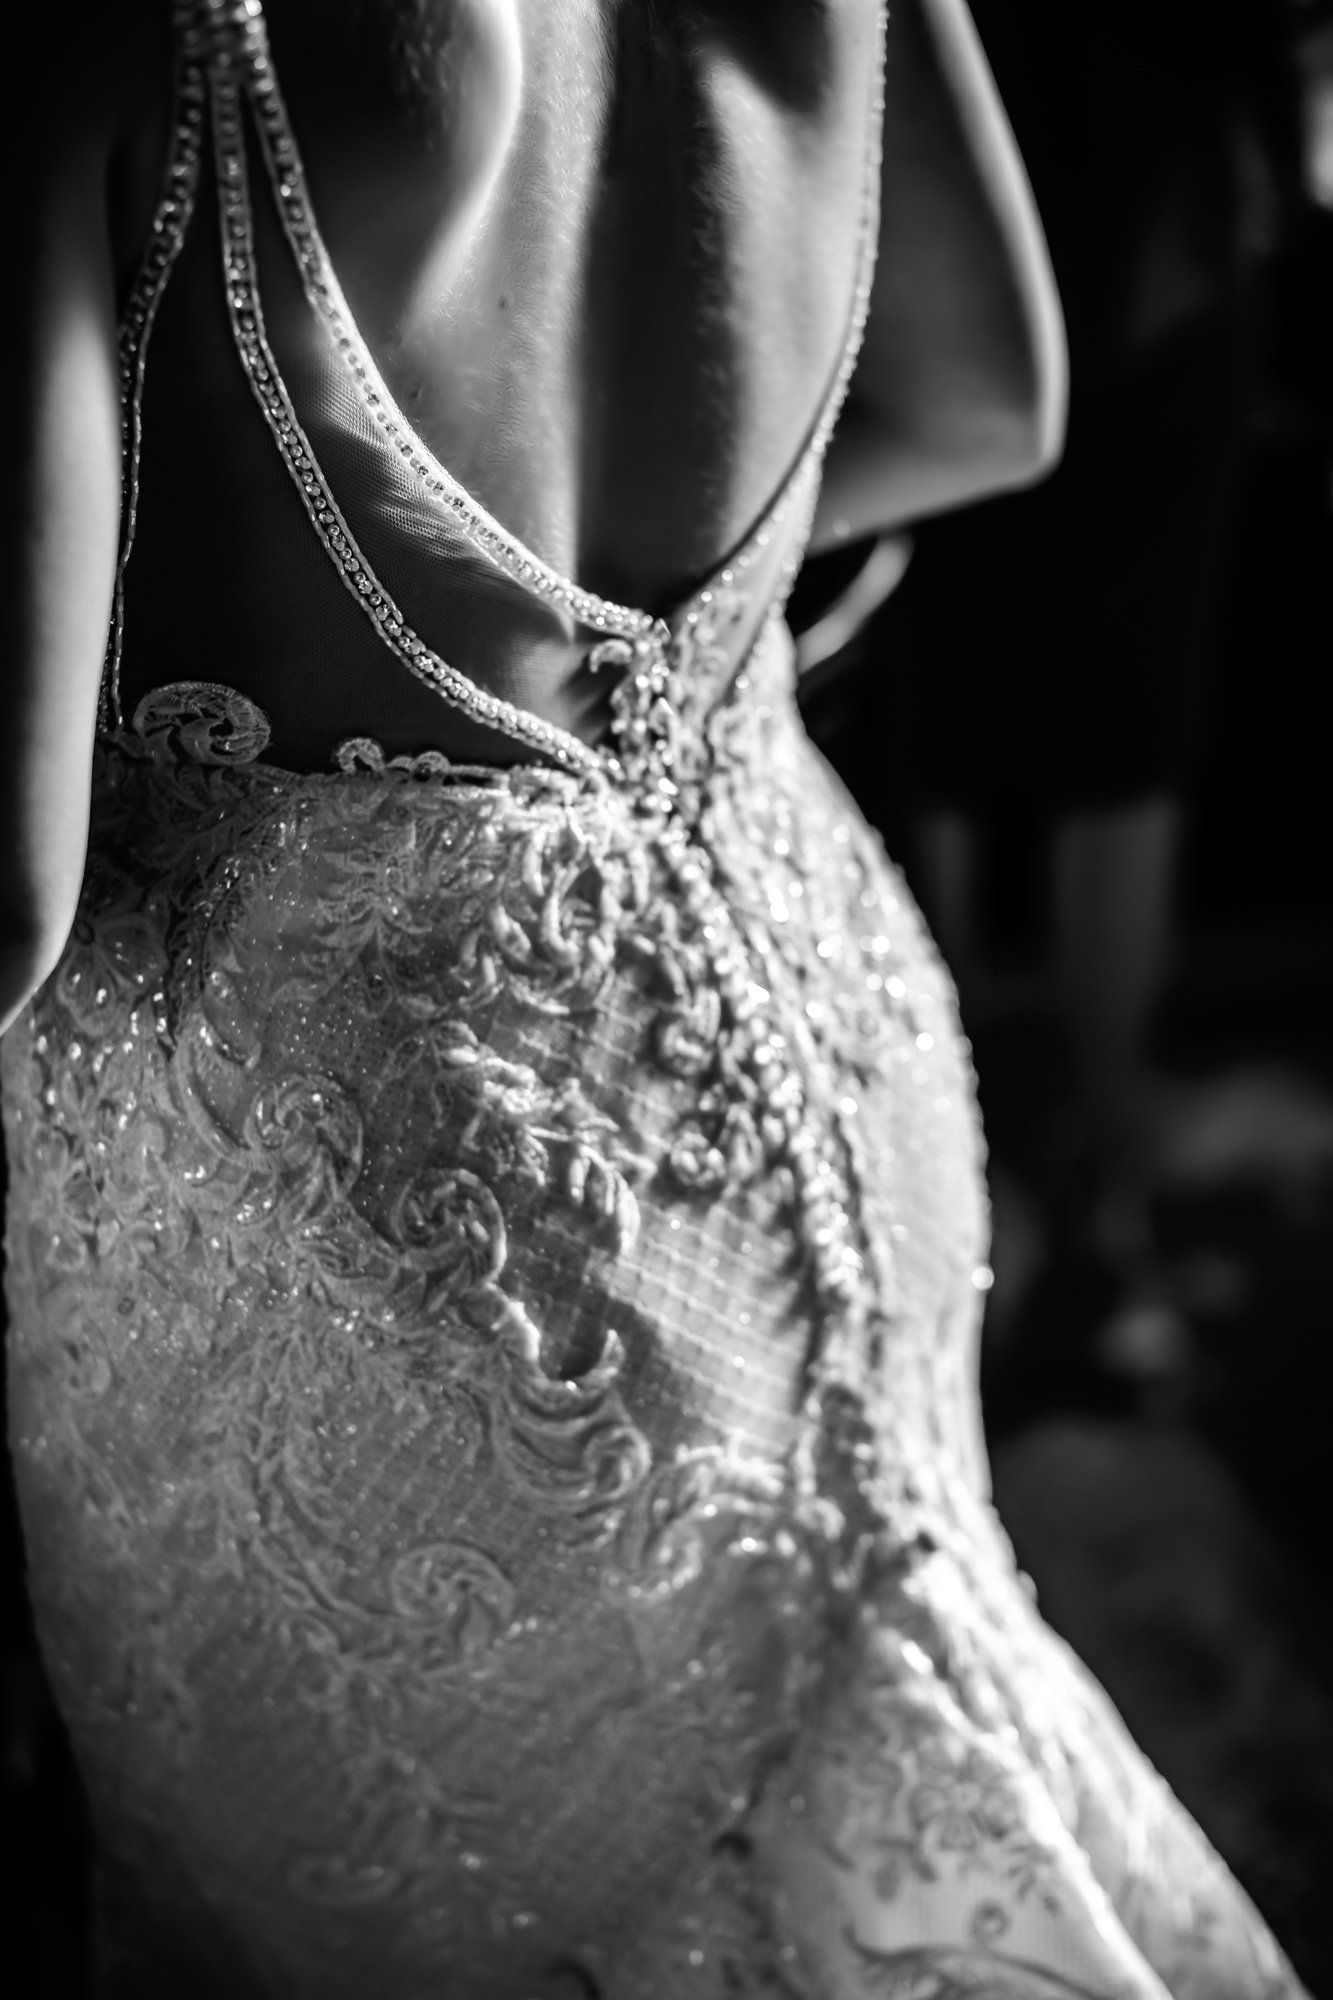  Illinois wedding photographer captures a detailed shot of the back of a wedding gown in black and white. wedding details #TealaWardPhotography #TealaWardWeddings #WeddingLocationsIllinois #IllinoisWedding #weddingdetails #weddingphotography #married